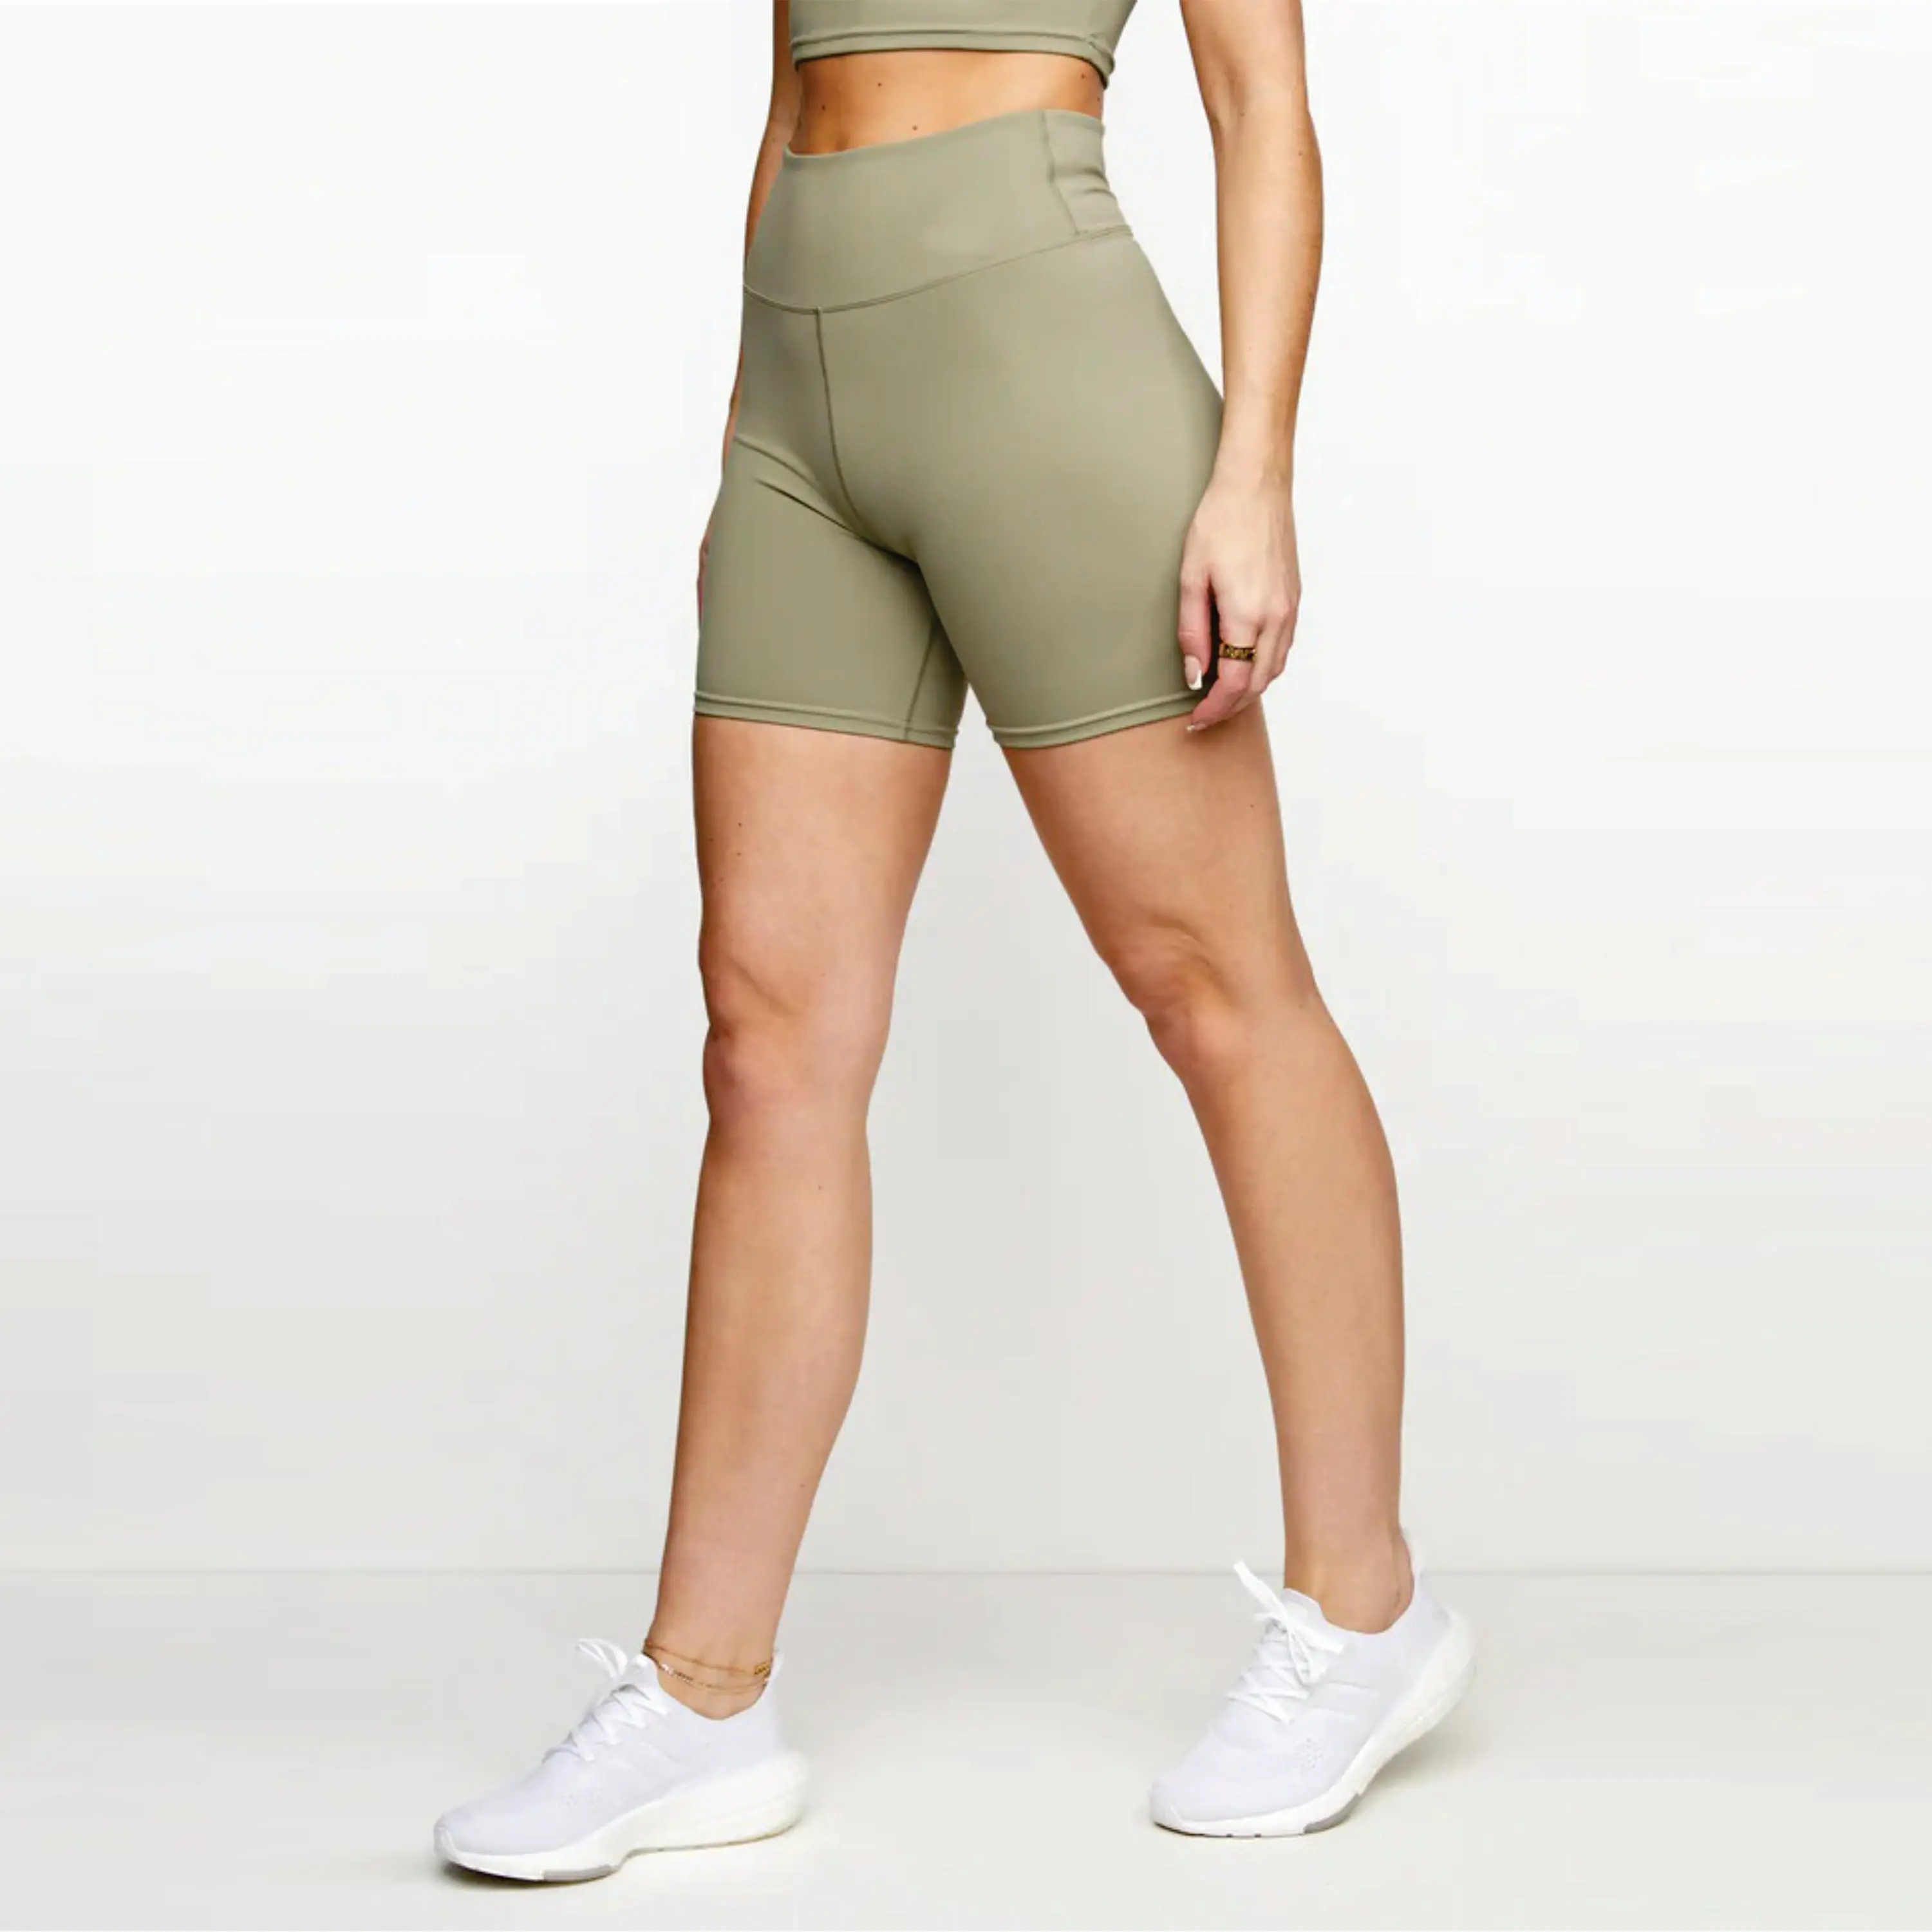 Squat proof & Wickable 78% Nylon 22% Elastane Booty Cut High Rise Fit Women's Sports 5 Inch Pale Olive Cycling Shorts